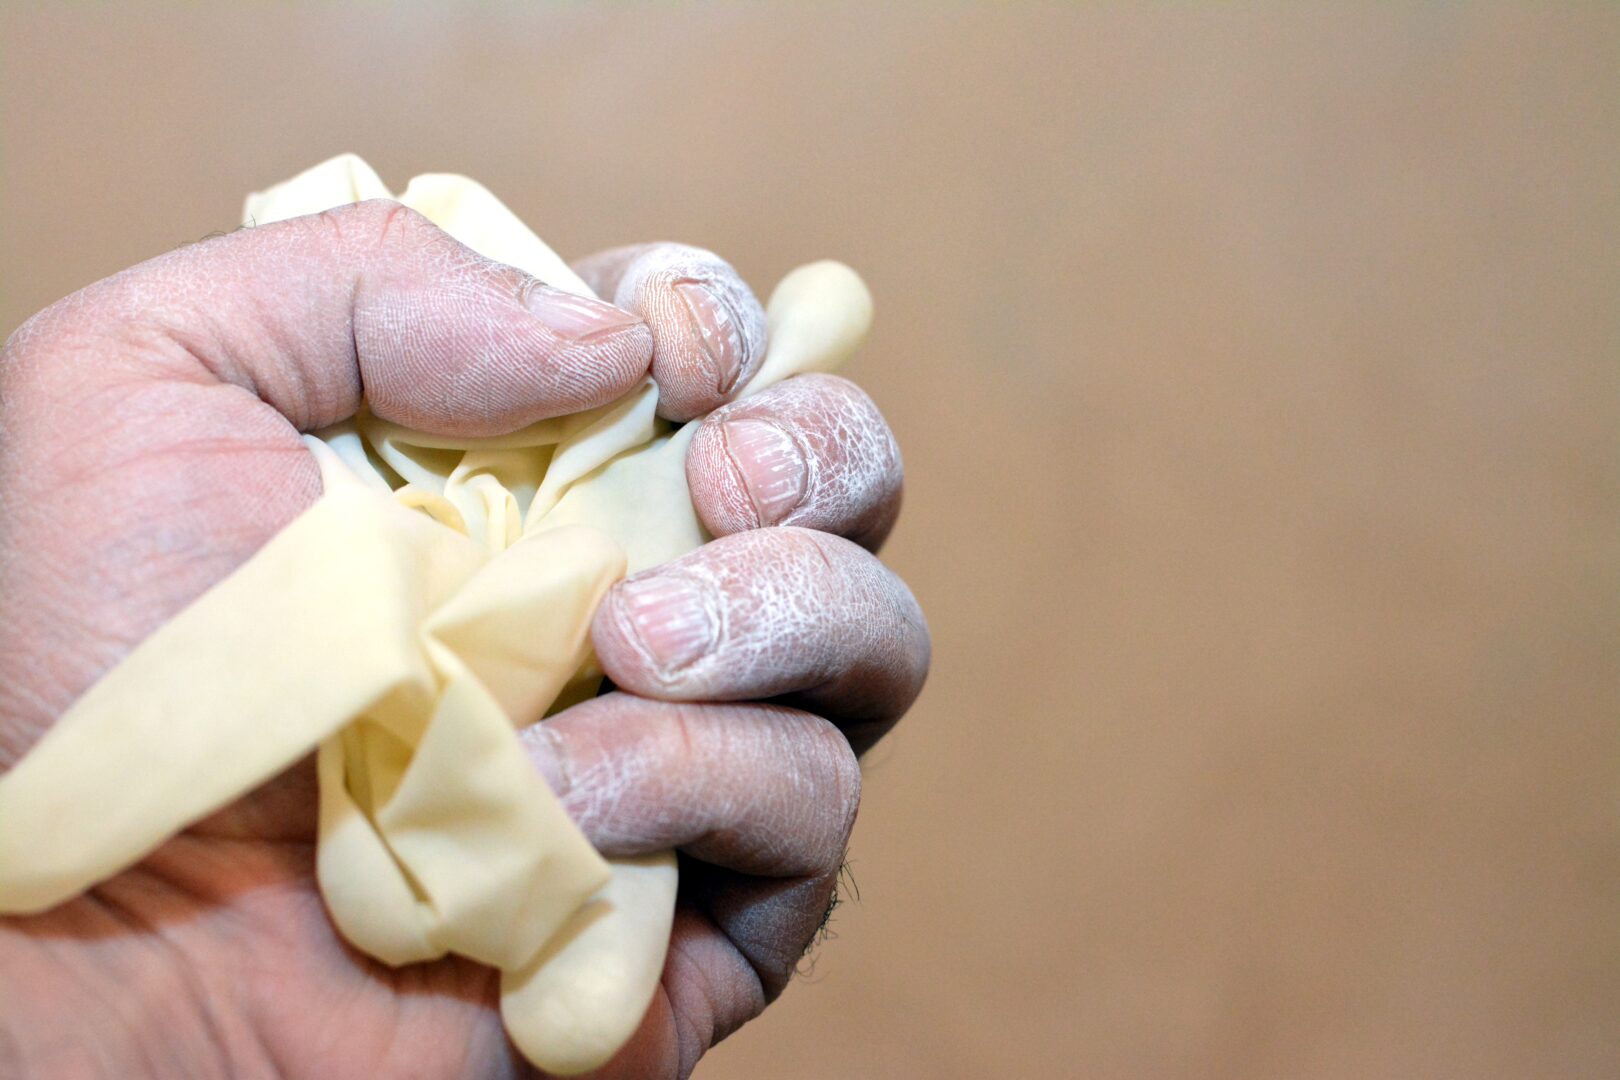 An image of a dry and chapped hand holding a disposable glove in a fist.